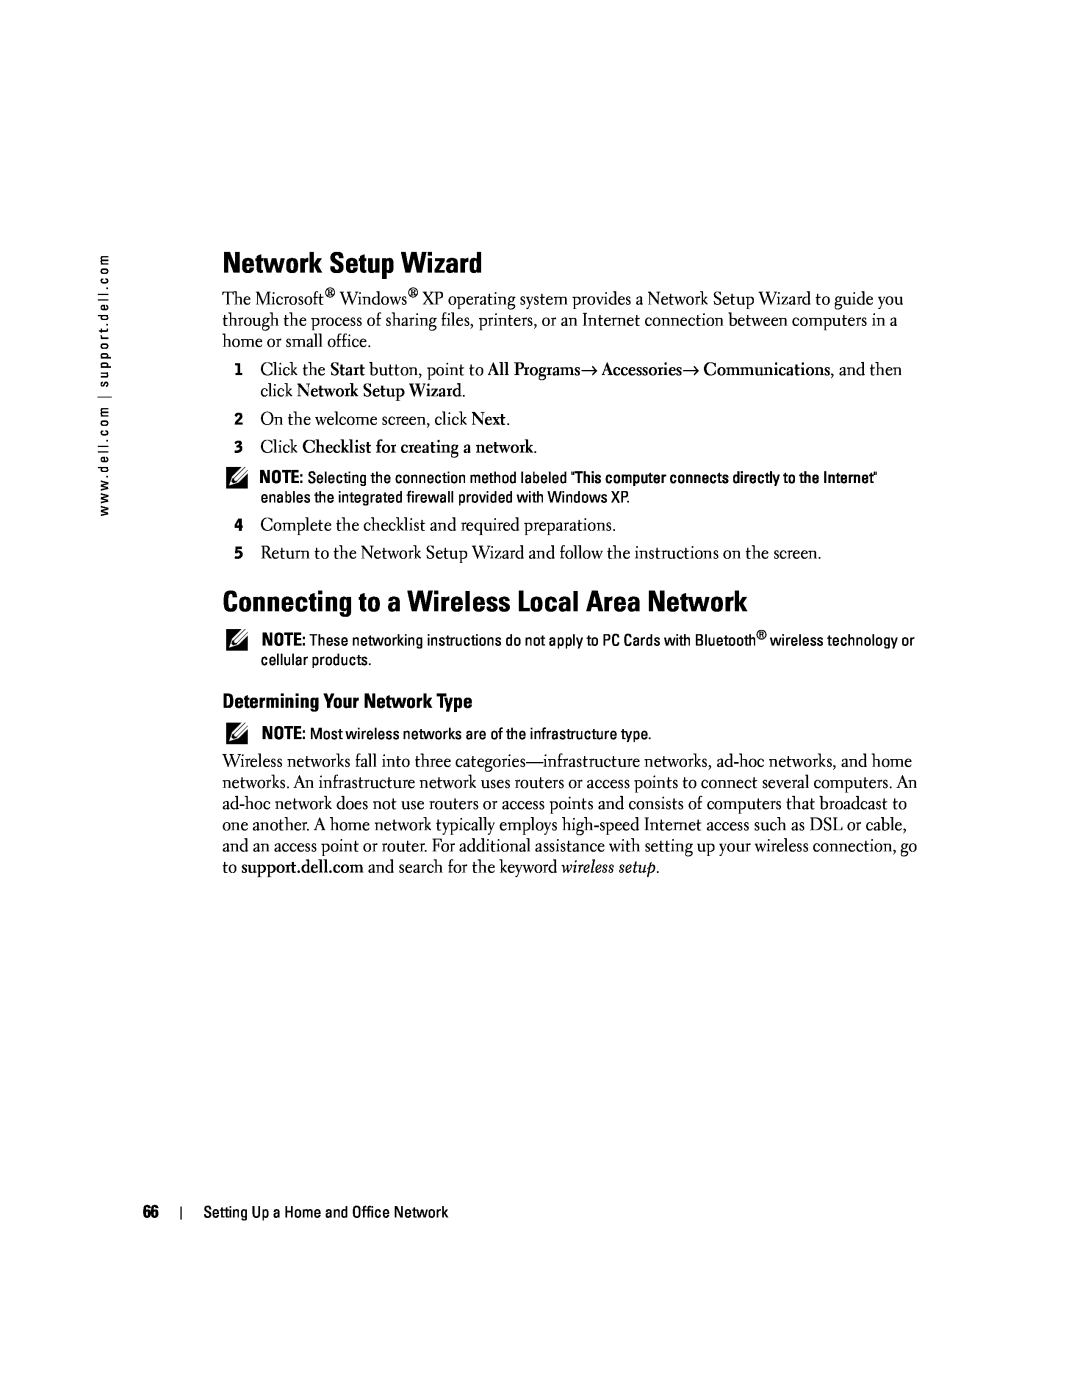 Dell PP09L owner manual Network Setup Wizard, Connecting to a Wireless Local Area Network, Determining Your Network Type 